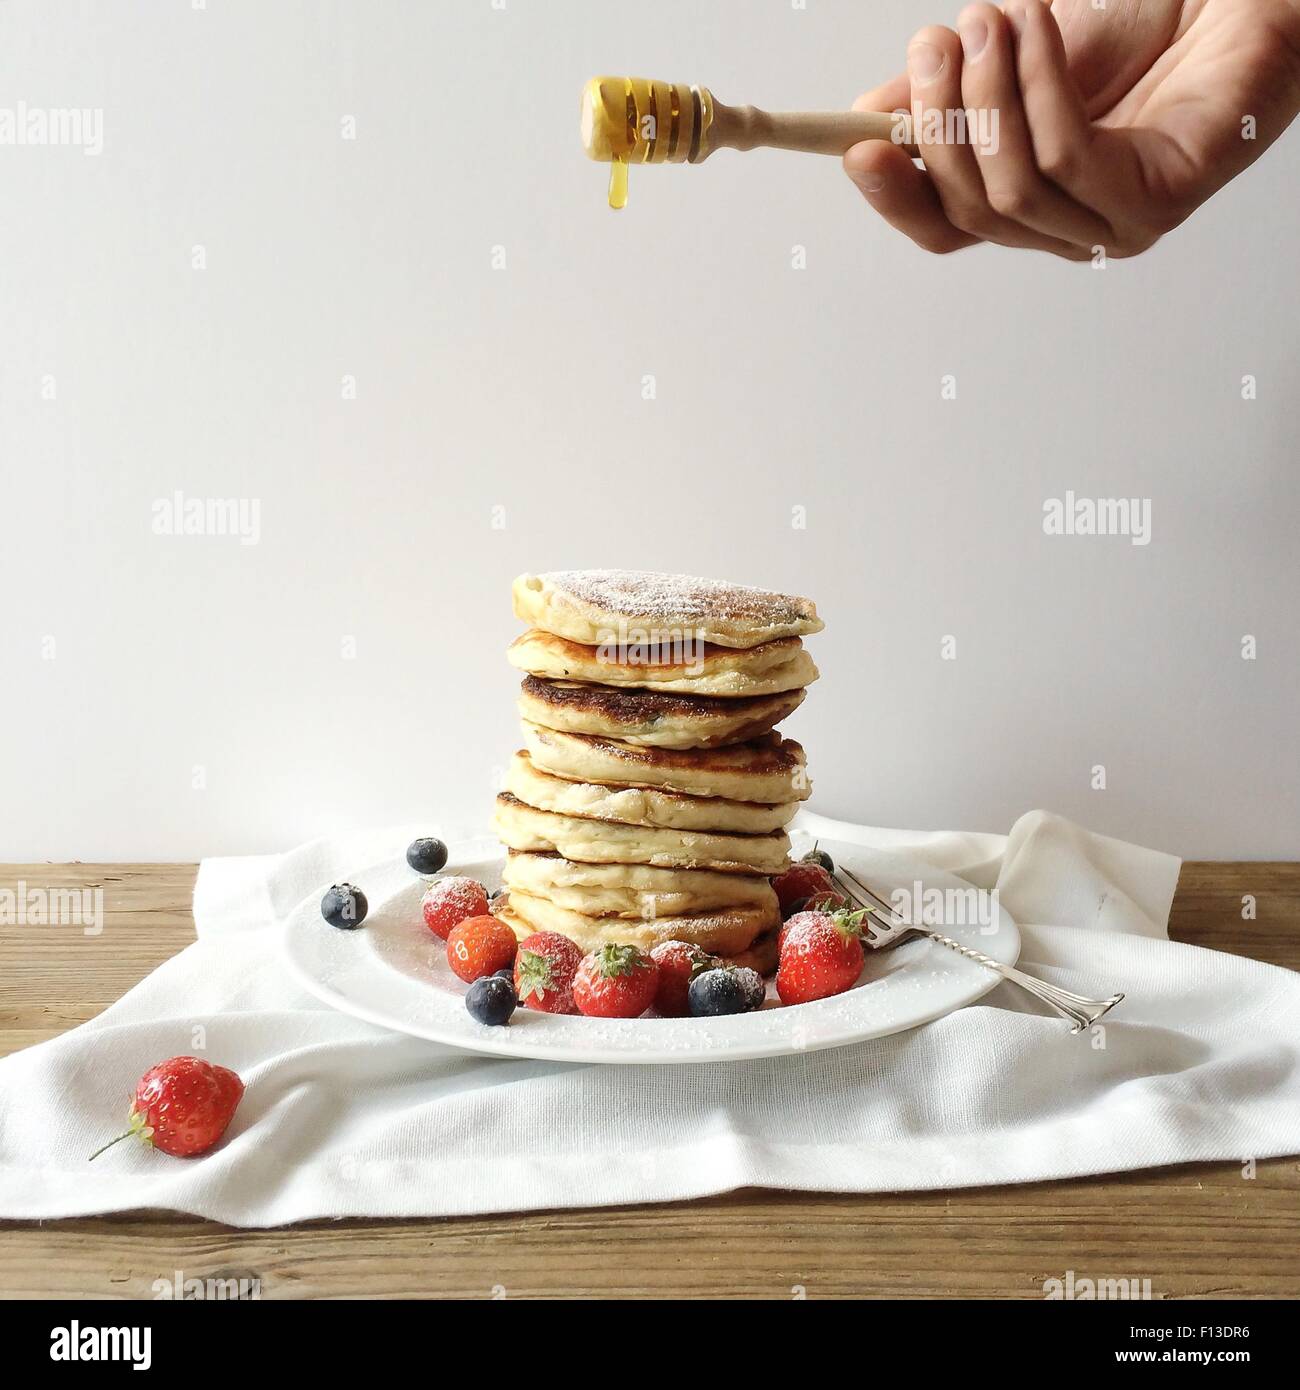 made images hi-res Alamy - stock and Ready pancakes photography